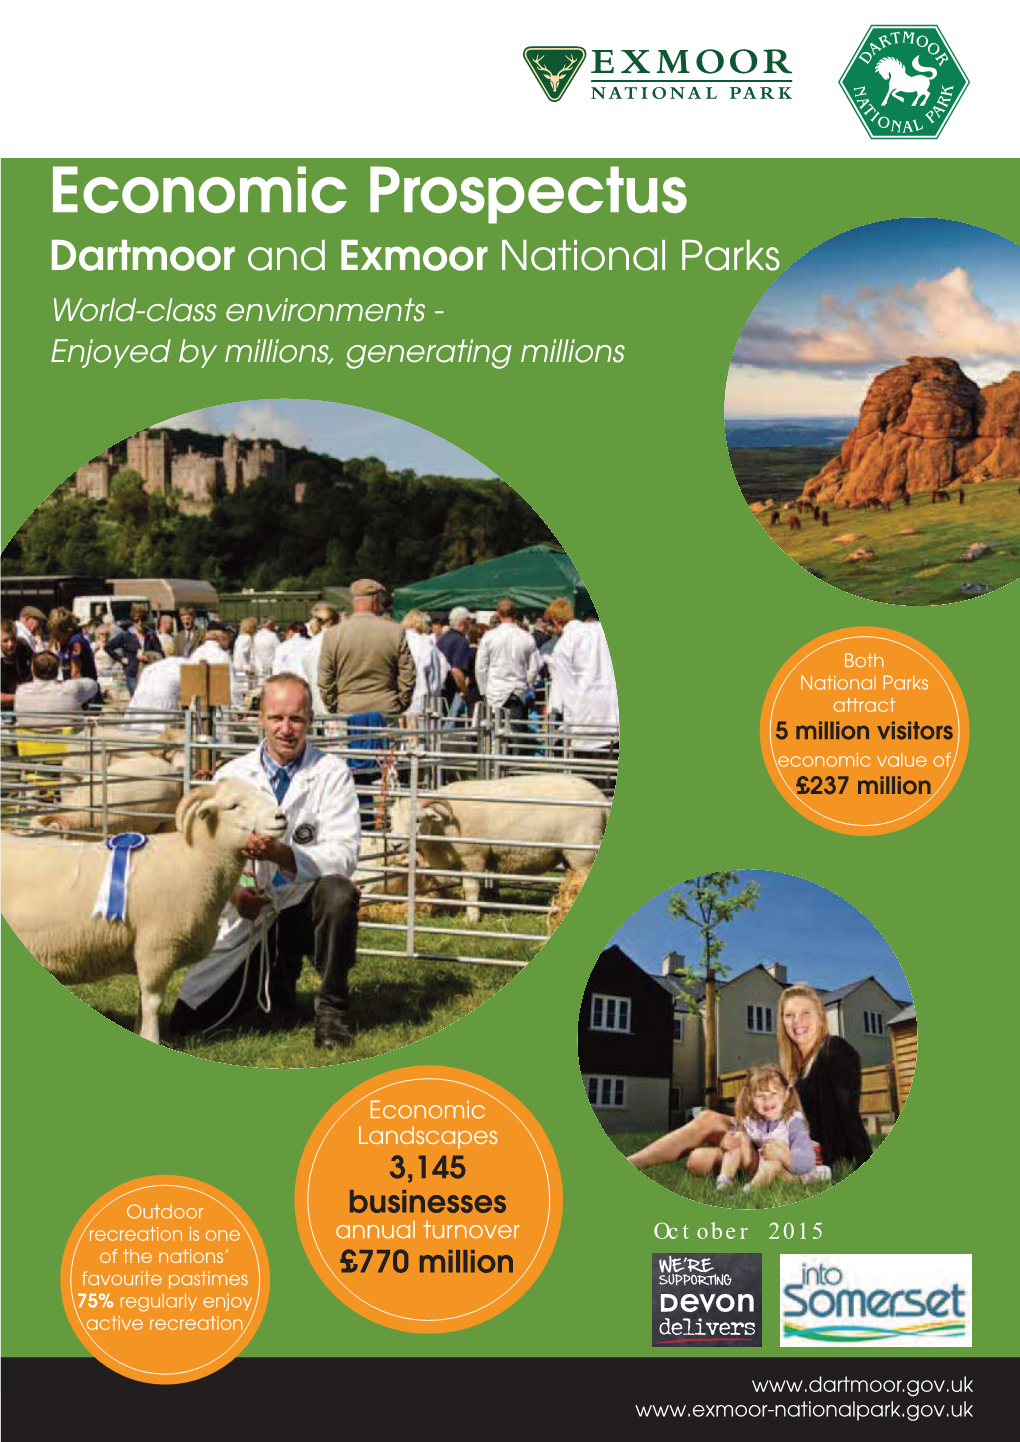 Economic Prospectus Dartmoor and Exmoor National Parks World-Class Environments - Enjoyed by Millions, Generating Millions